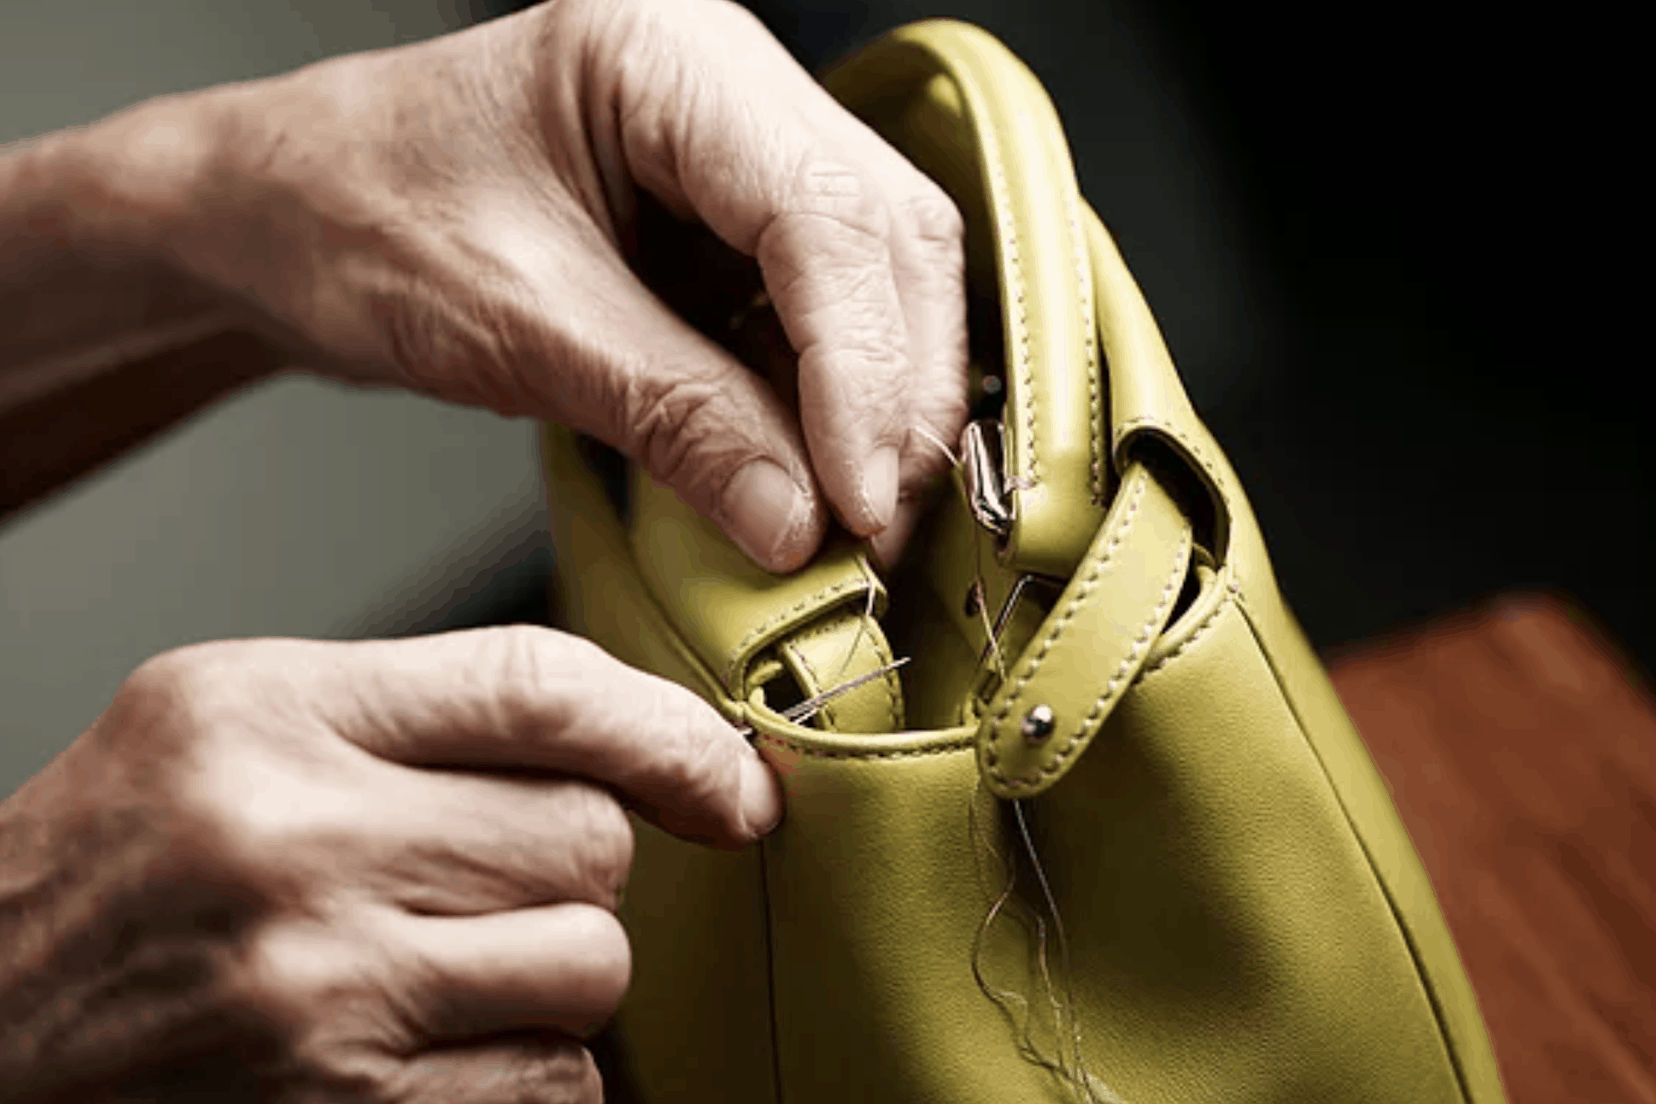 Top 5 spots to repair your luxury bags in Singapore